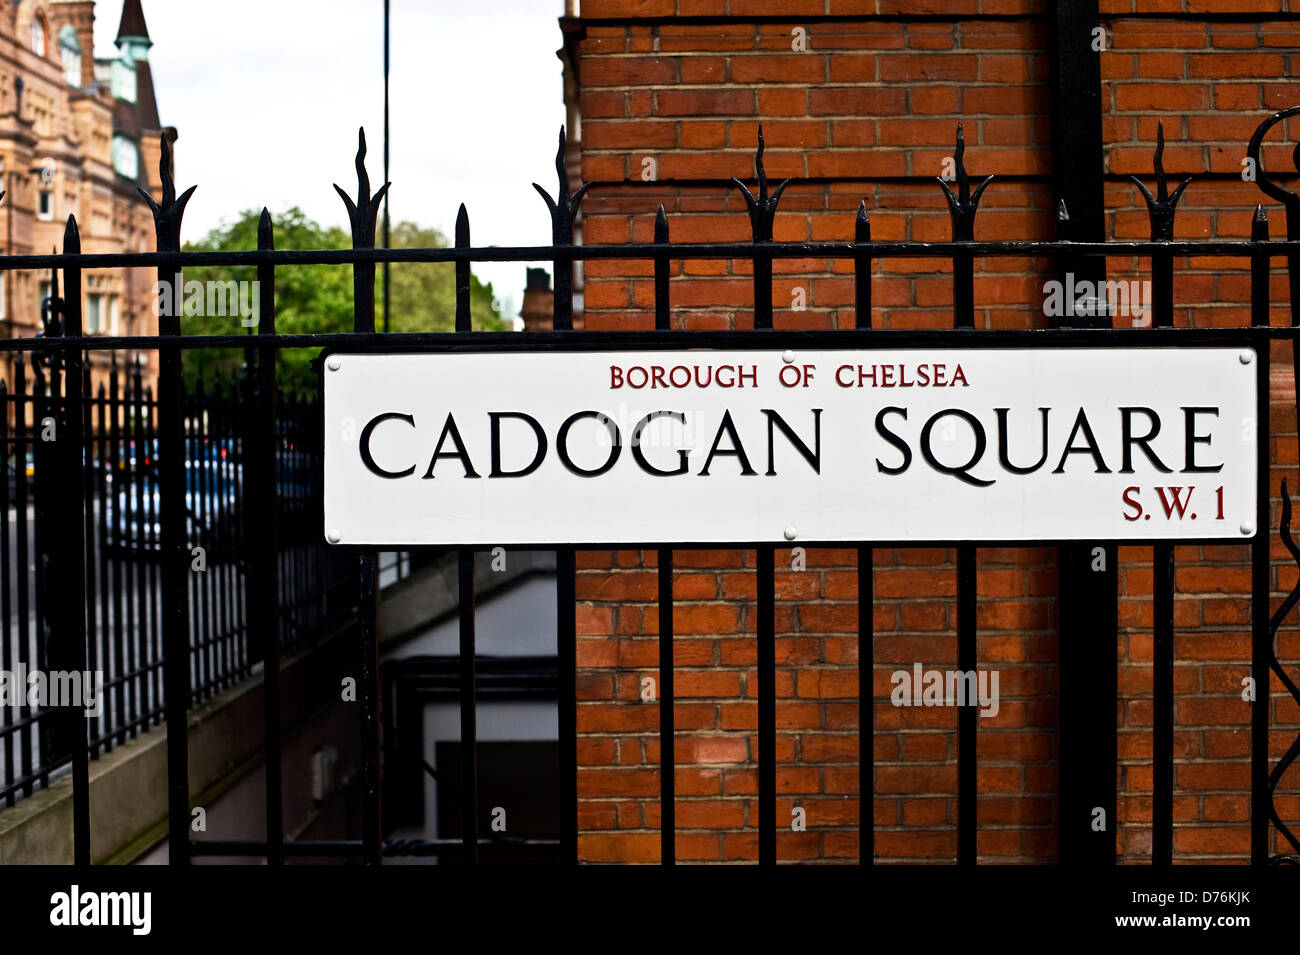 Street sign for Cadogan Square, Chelsea, London Stock Photo